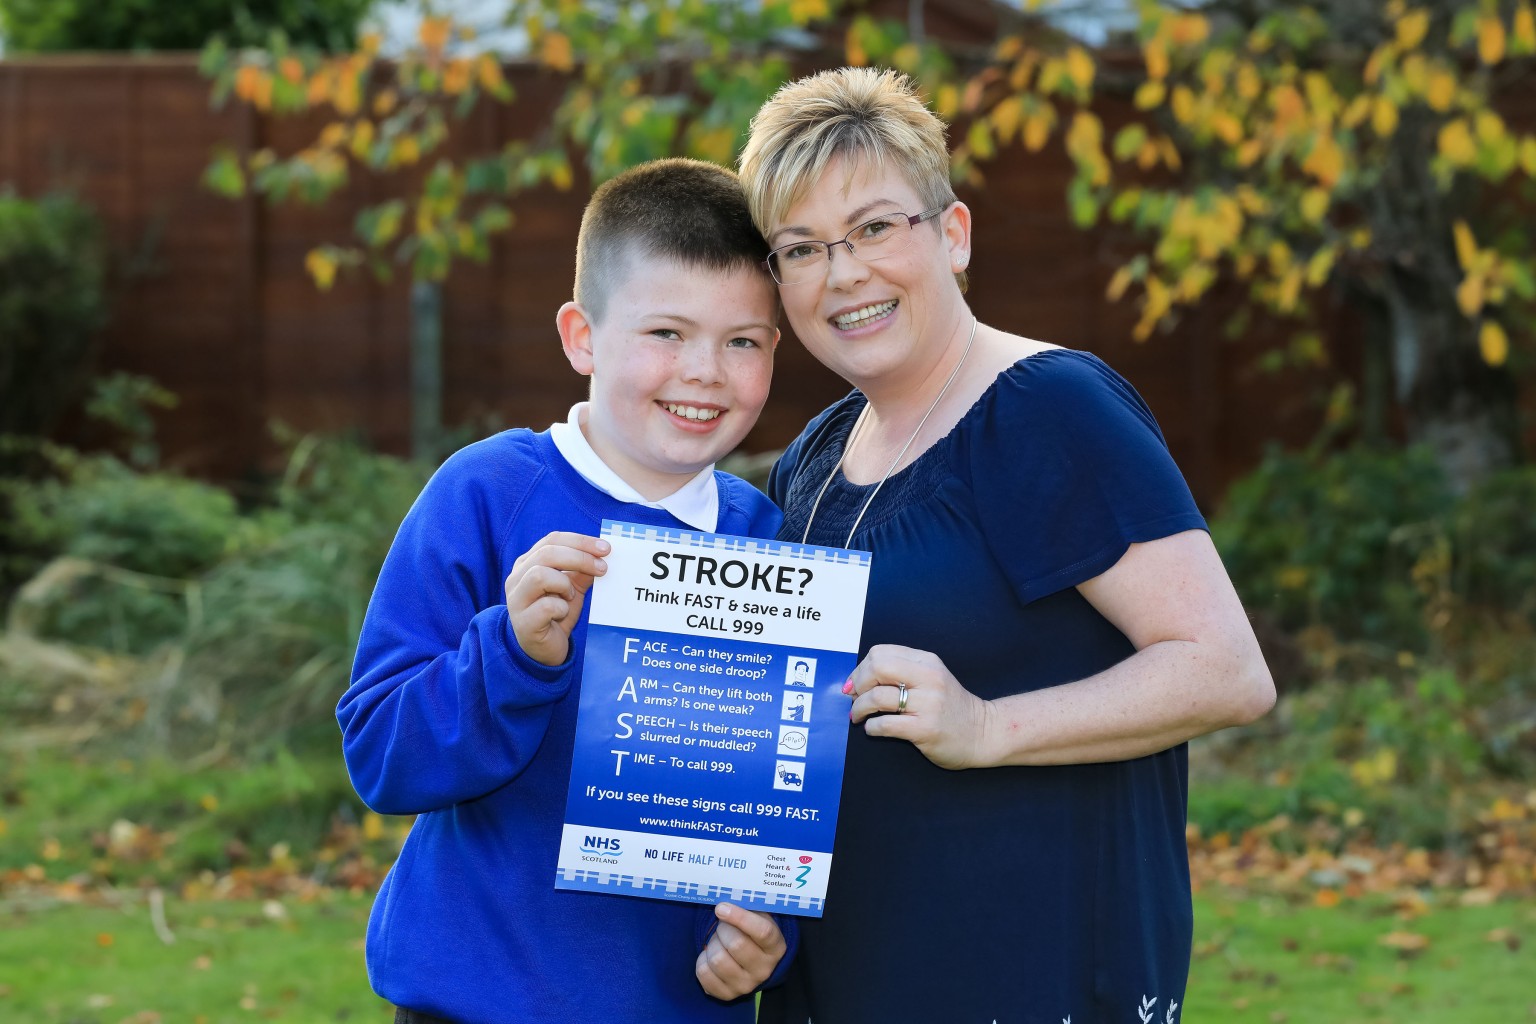 Stroke survivor Debbie and son Finlay urge people to call 999 FAST in the event of a stroke